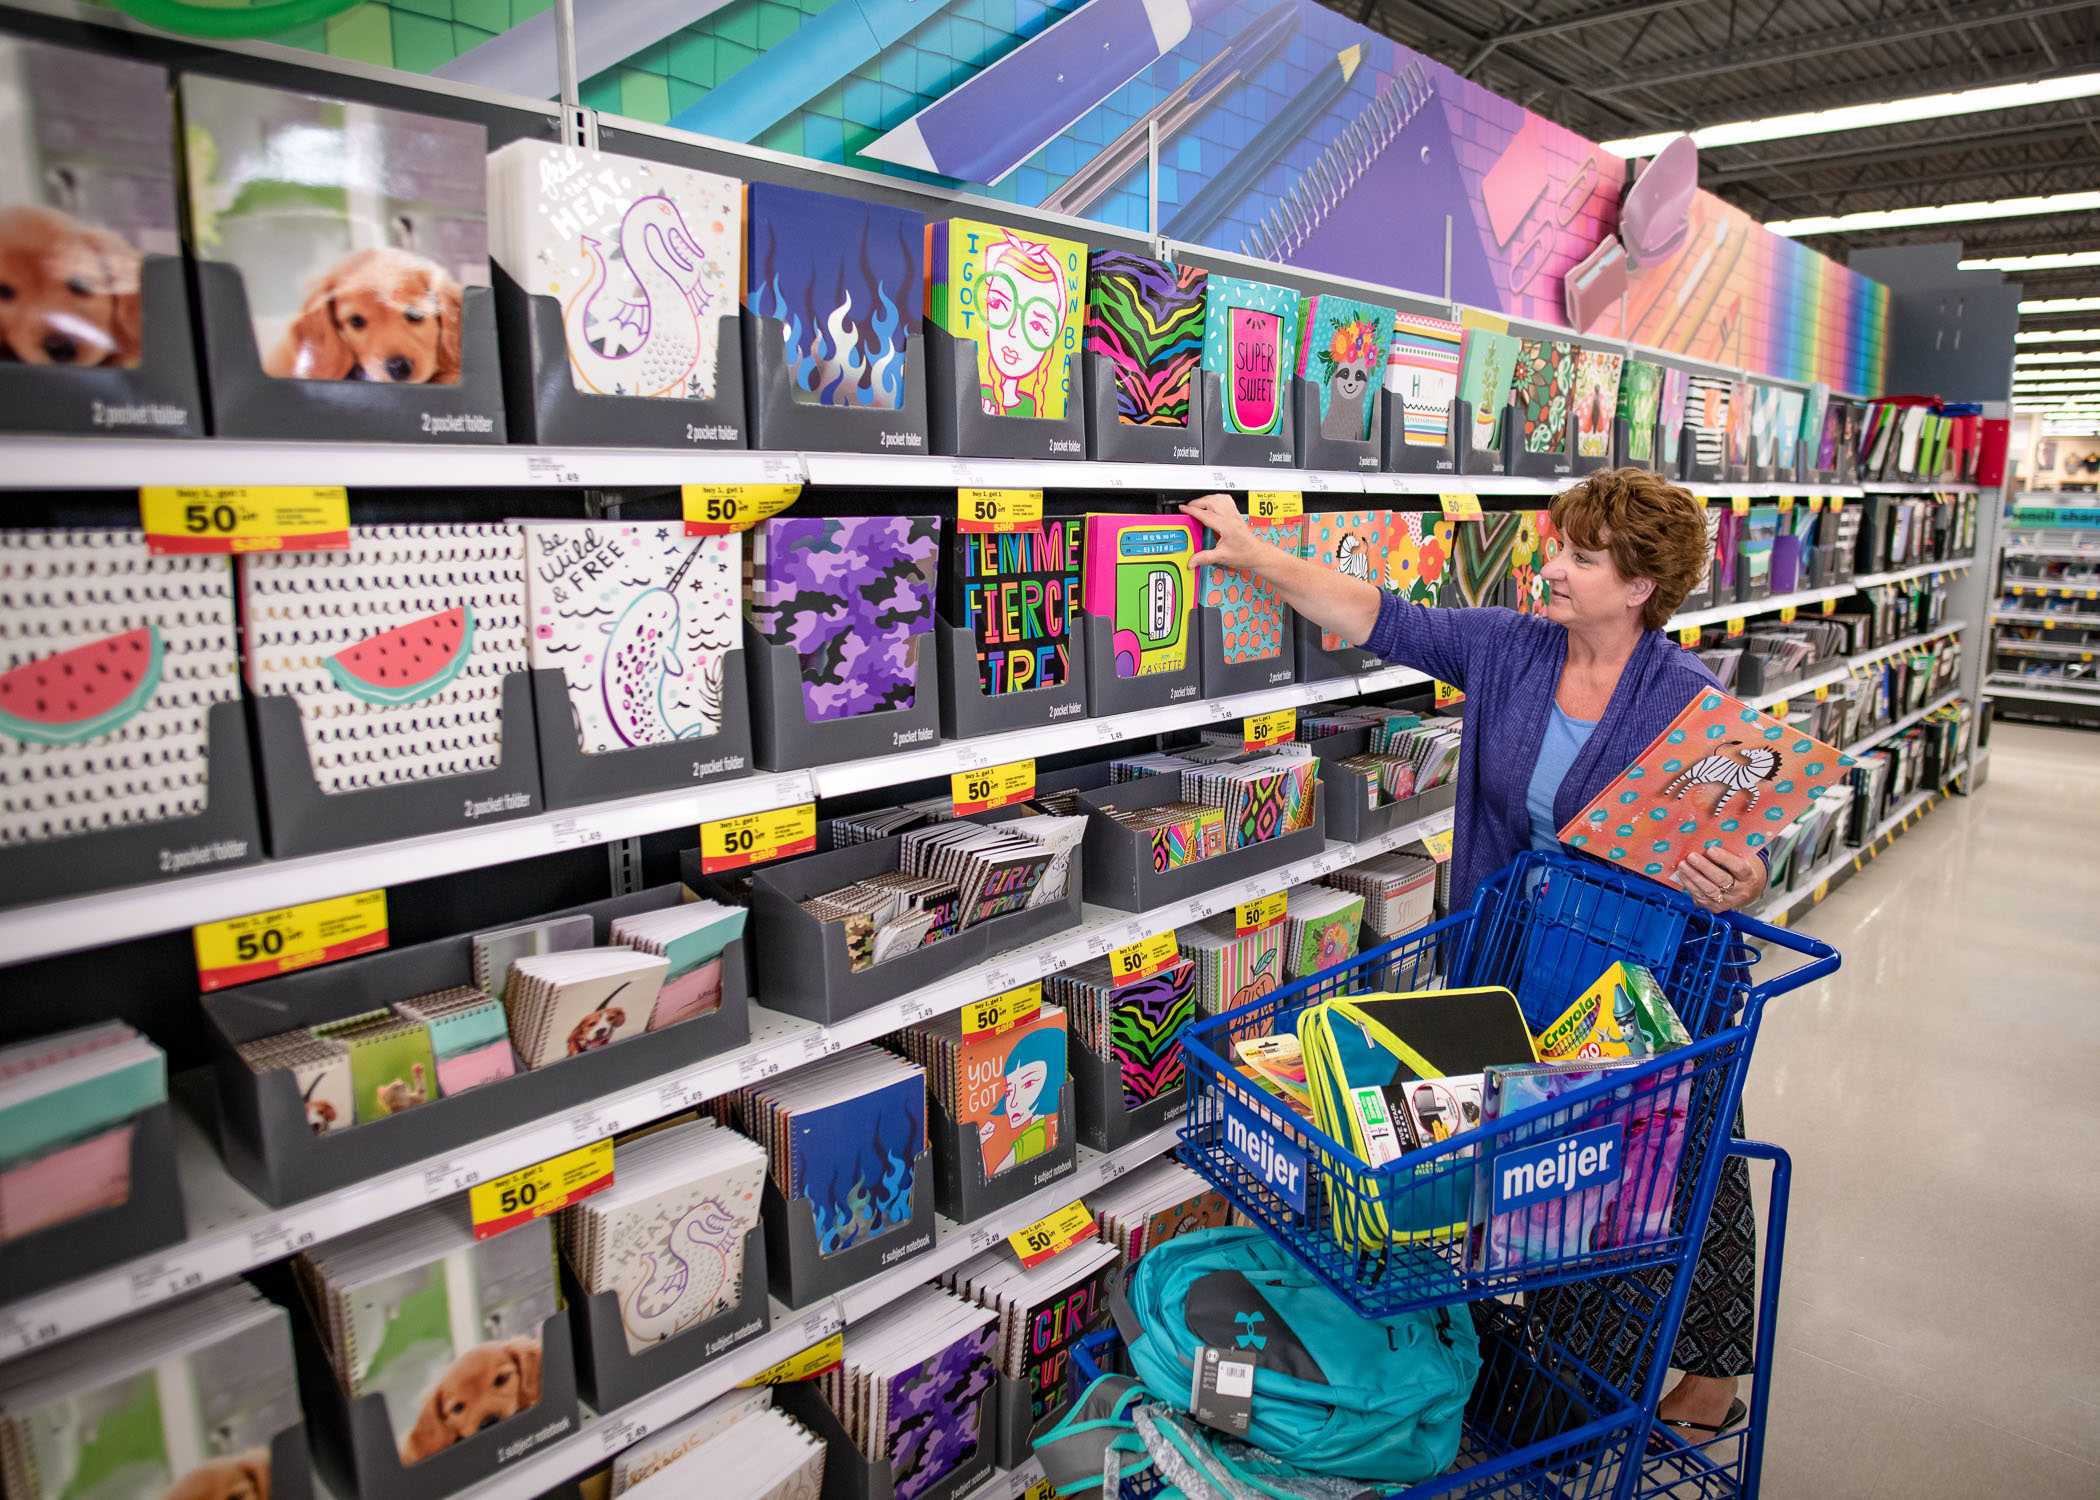 Meijer reveals top trends for back to school shopping put upgrading backpacks and returning in style at the top of families’ supply lists.